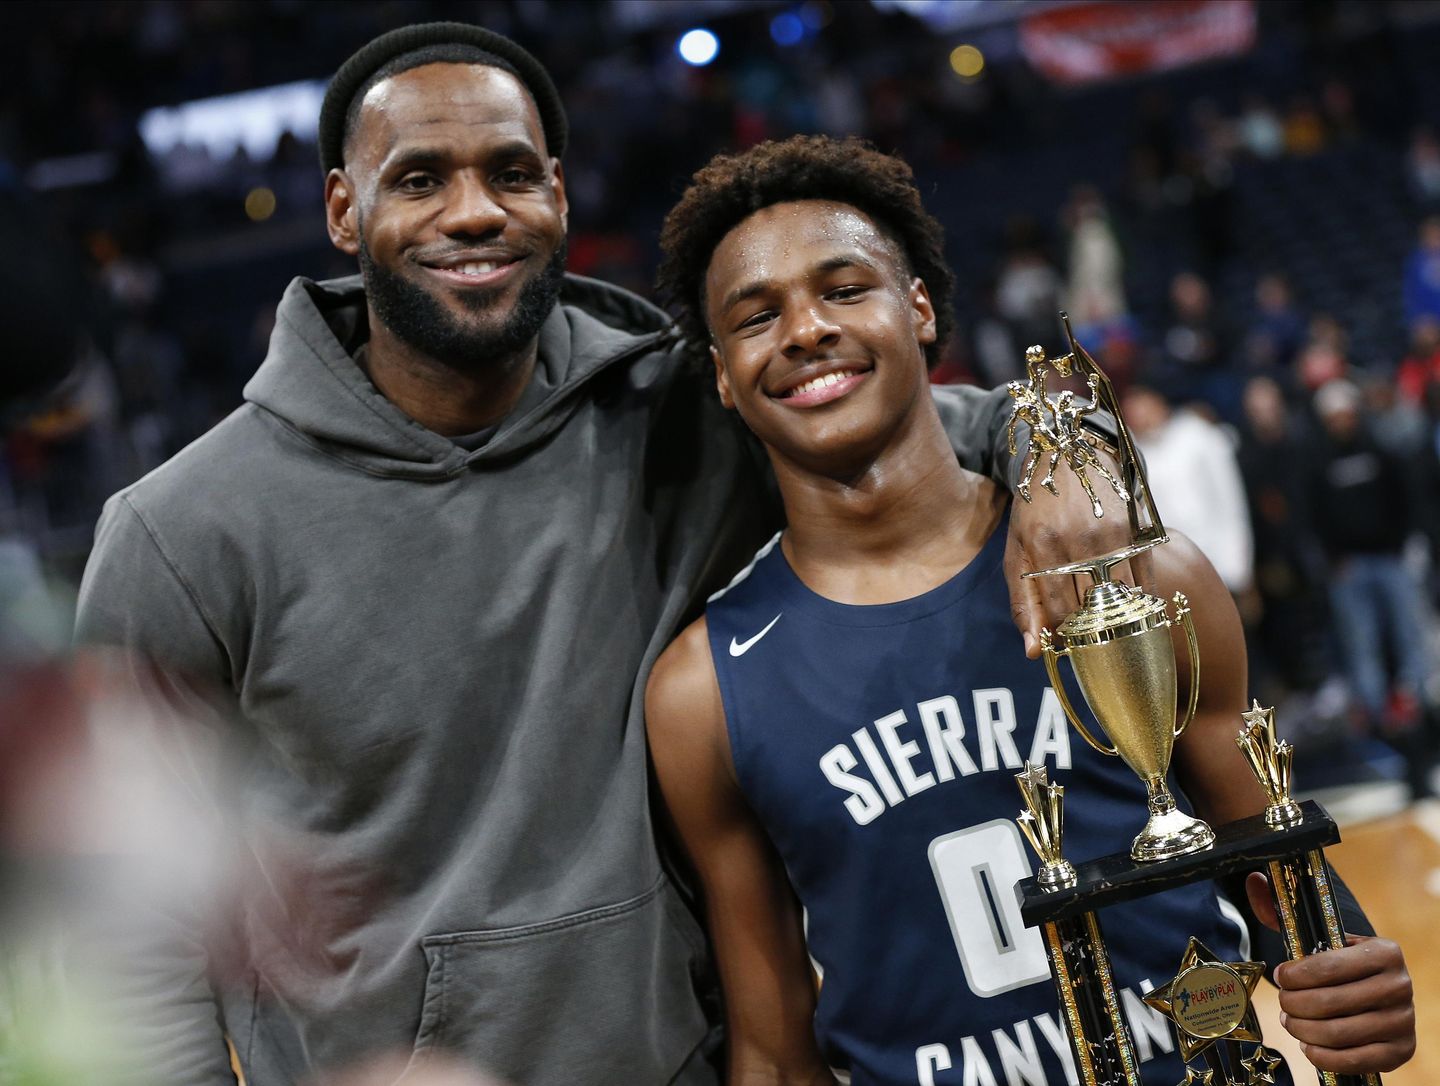 Bronny James plays piano, dines out in video, photos emerging days after he suffers cardiac arrest